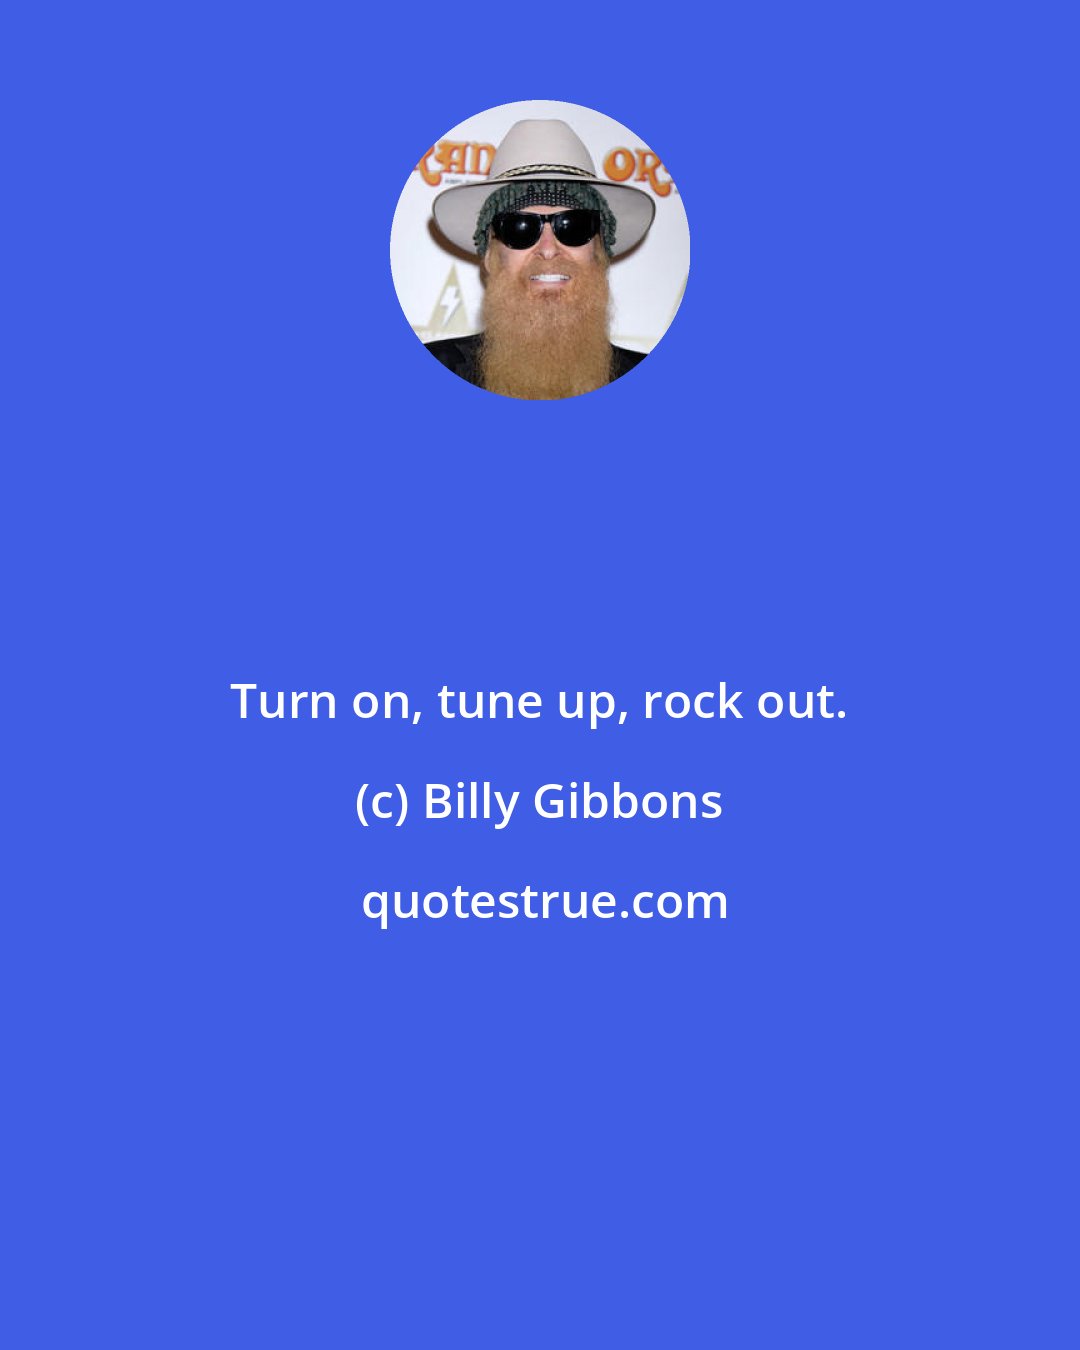 Billy Gibbons: Turn on, tune up, rock out.